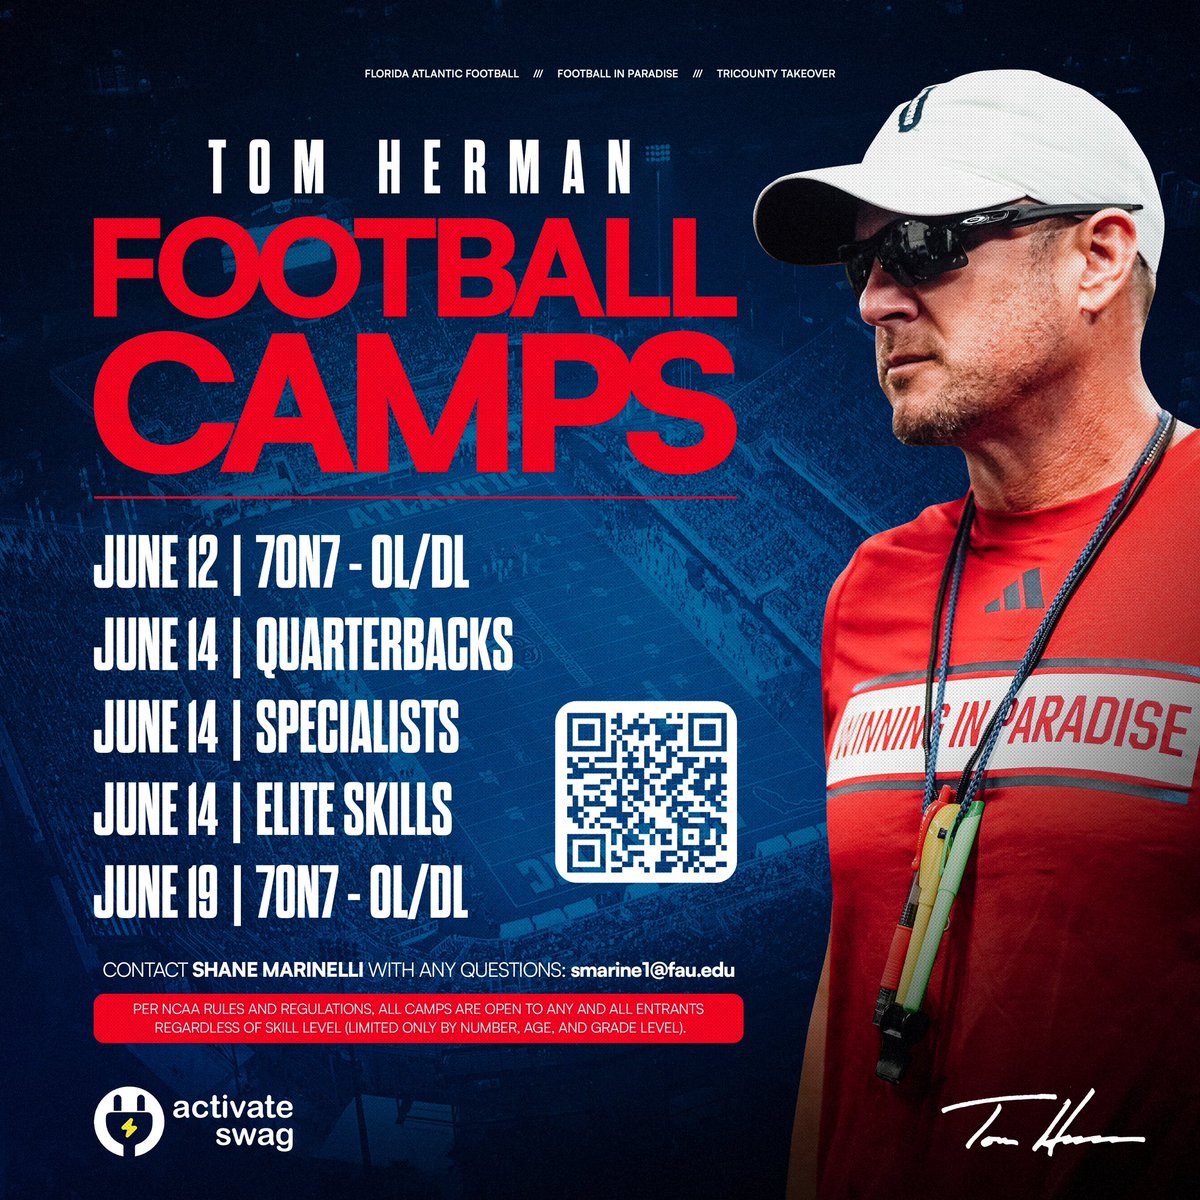 Almost camp season in Paradise!🏈🏝️ For more information and to register, visit the camp website⬇️ tomhermanfootballcamps.com #TriCountyTakeover | activateswag.com